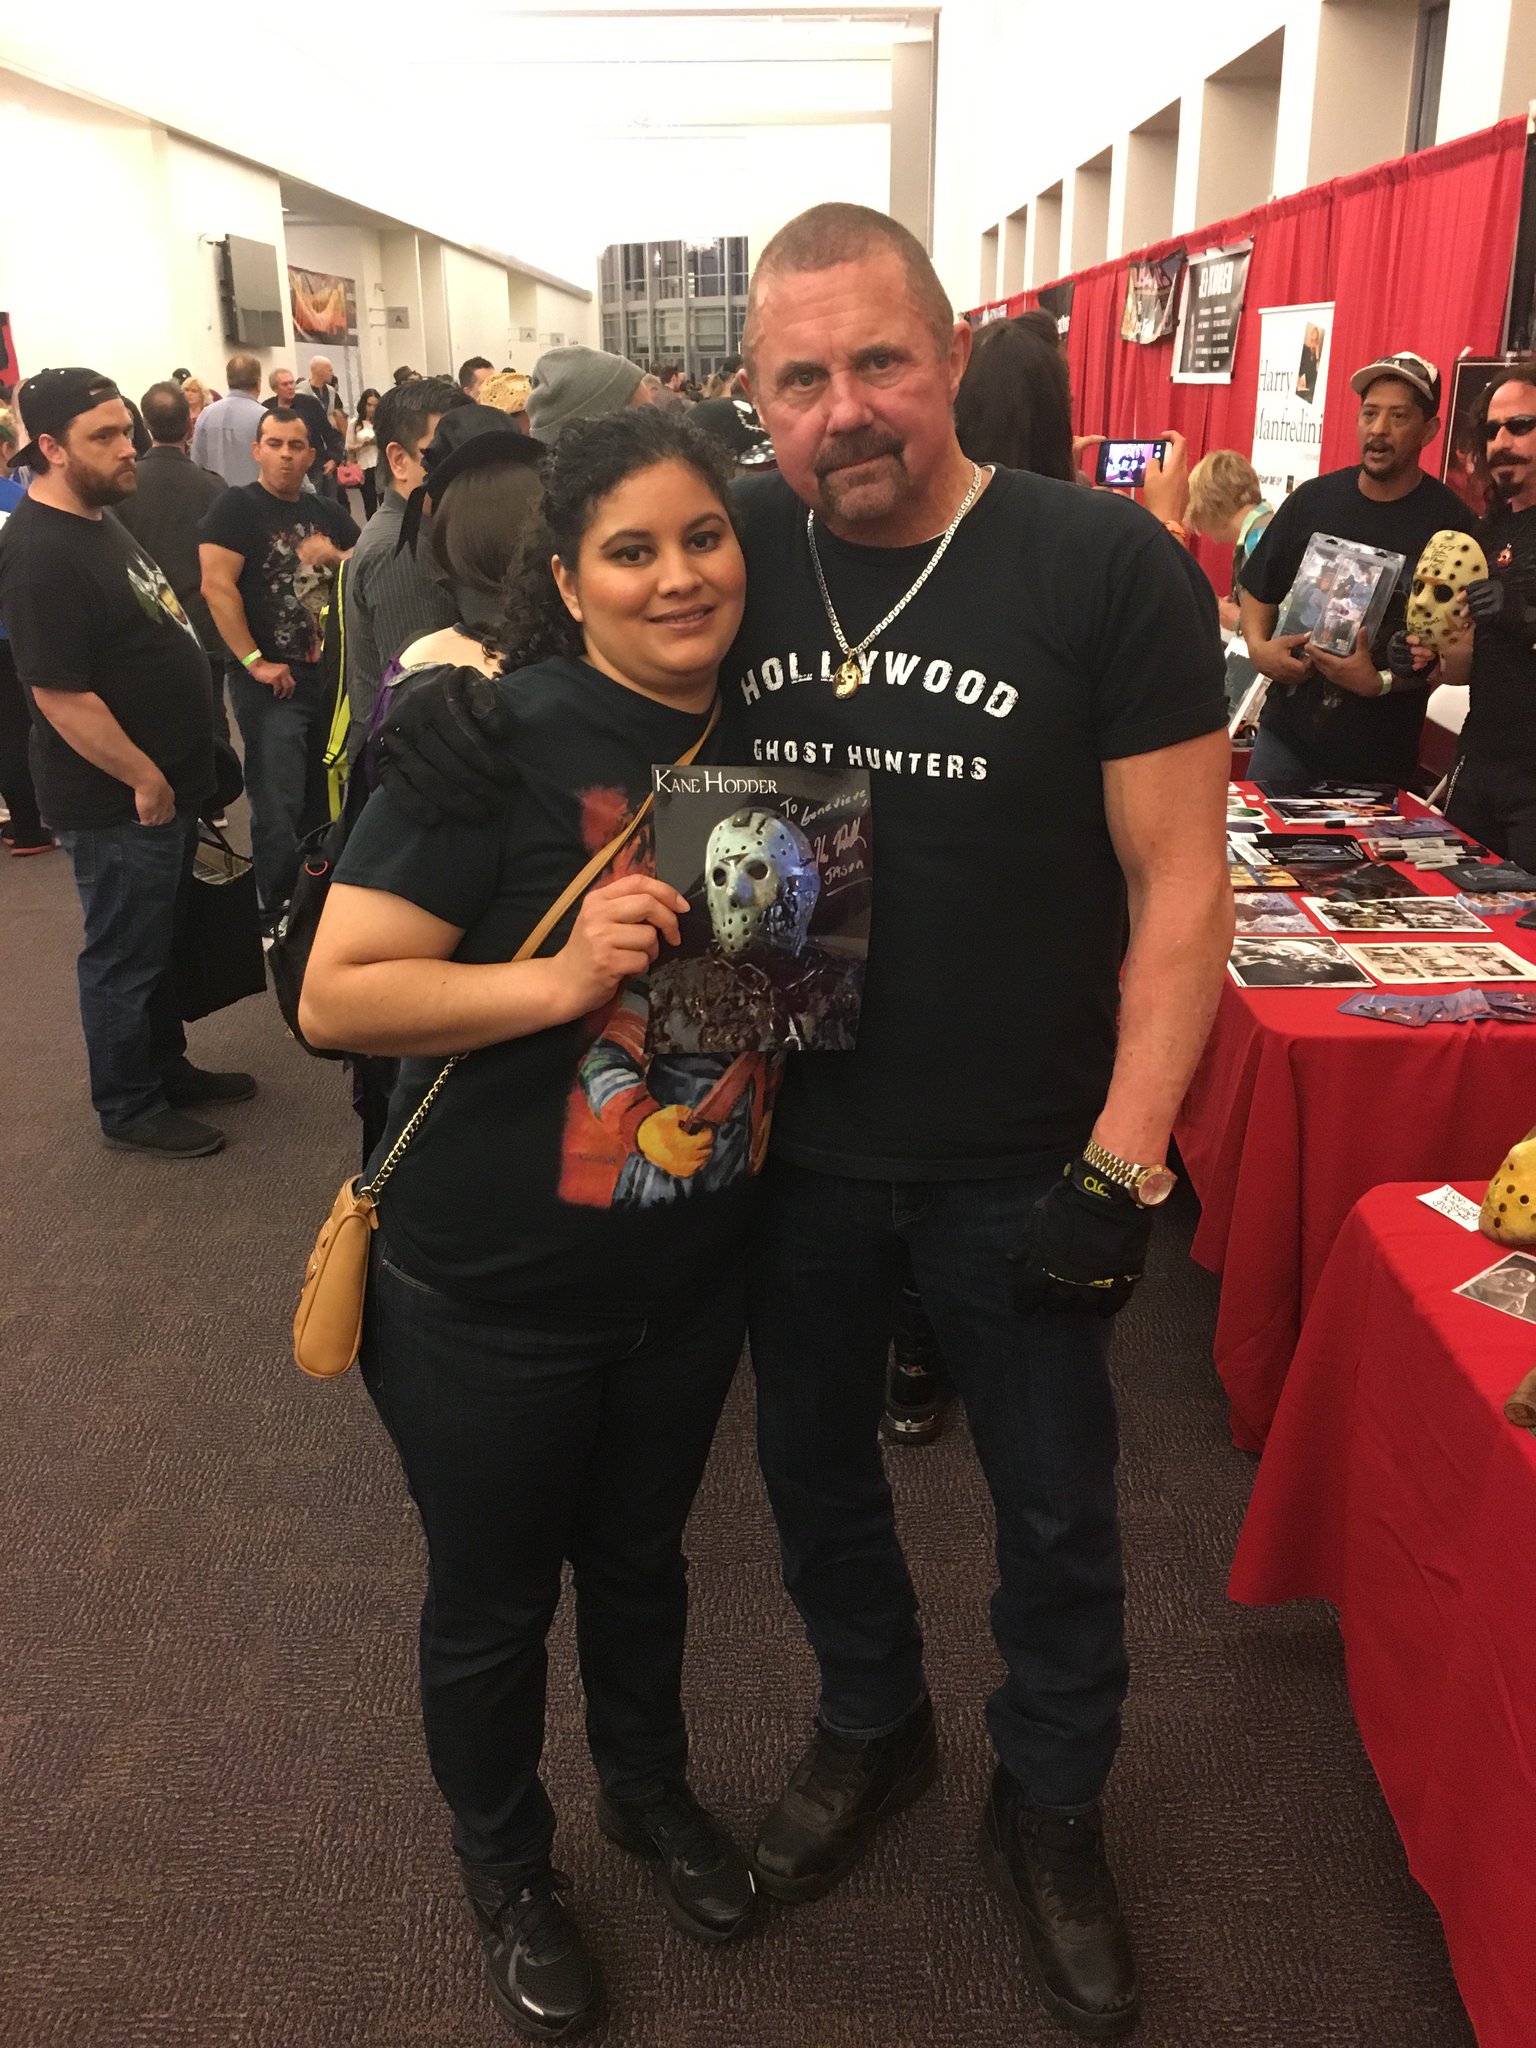 Happy Birthday to Kane Hodder. Had the privilege of meeting him at 